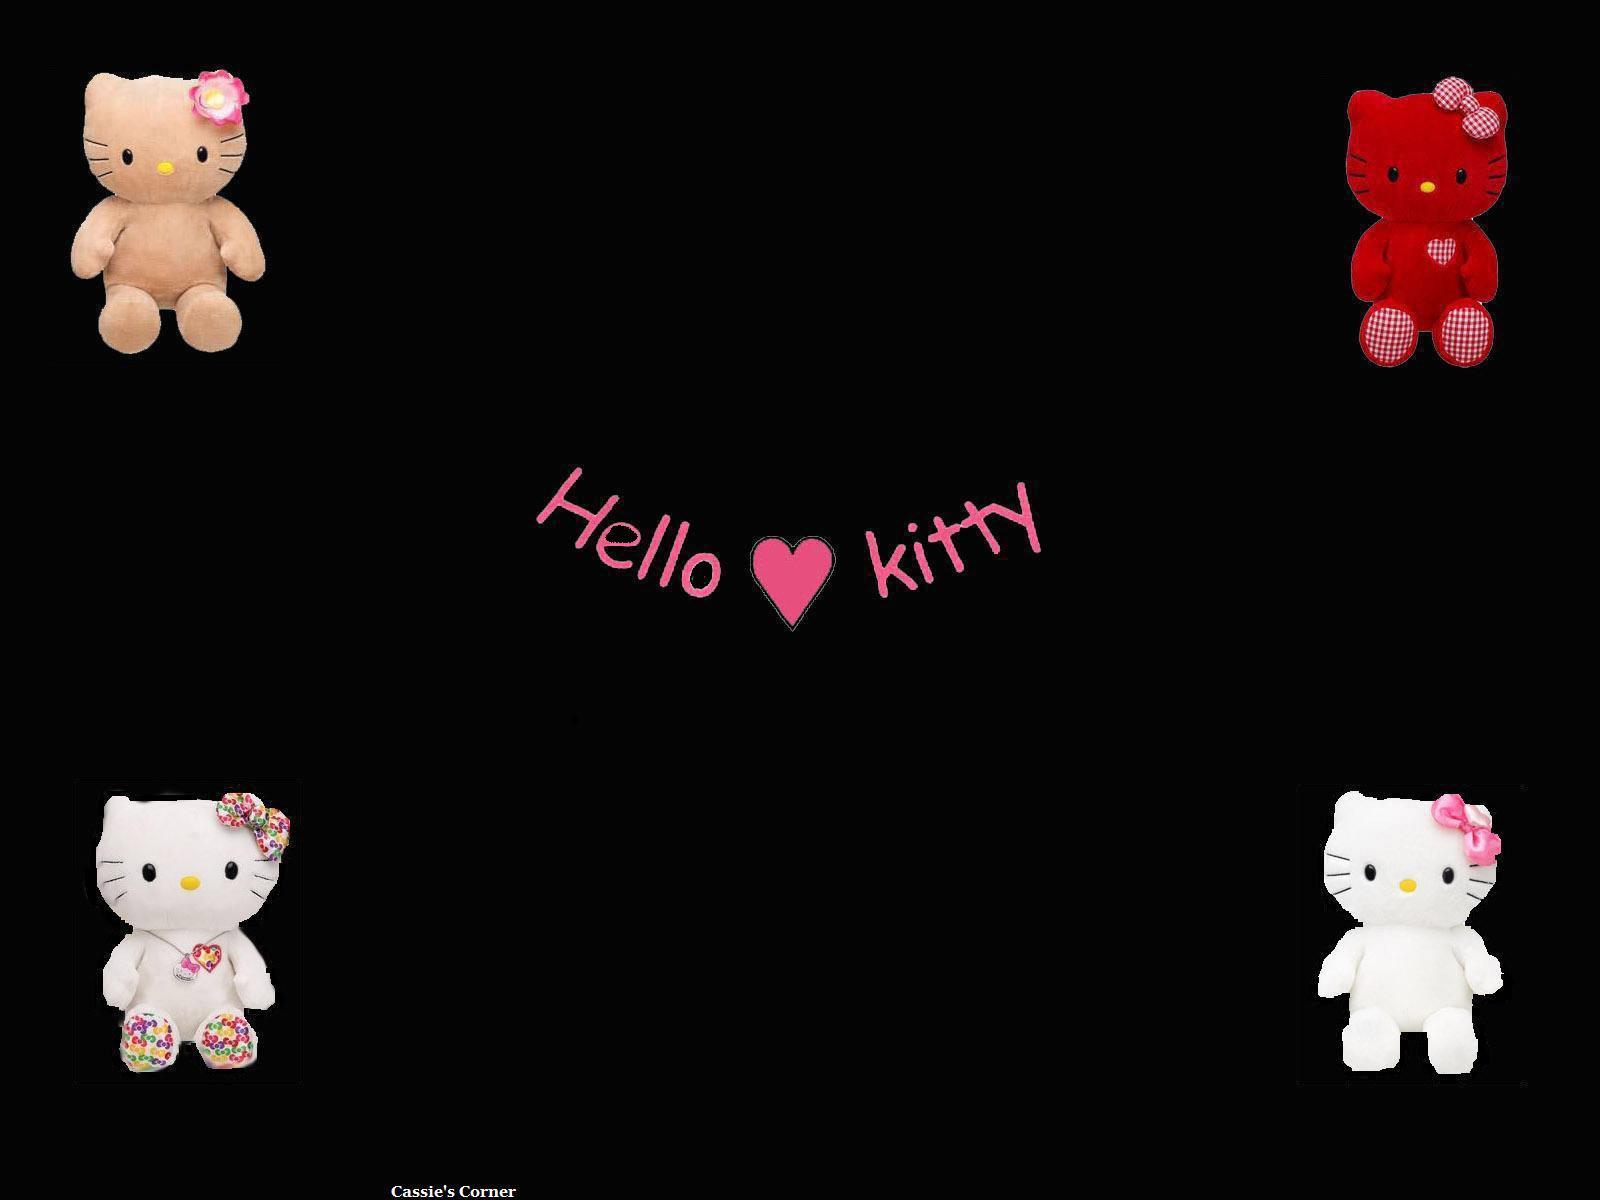 Wallpaper For > Black Hello Kitty Background For Computers